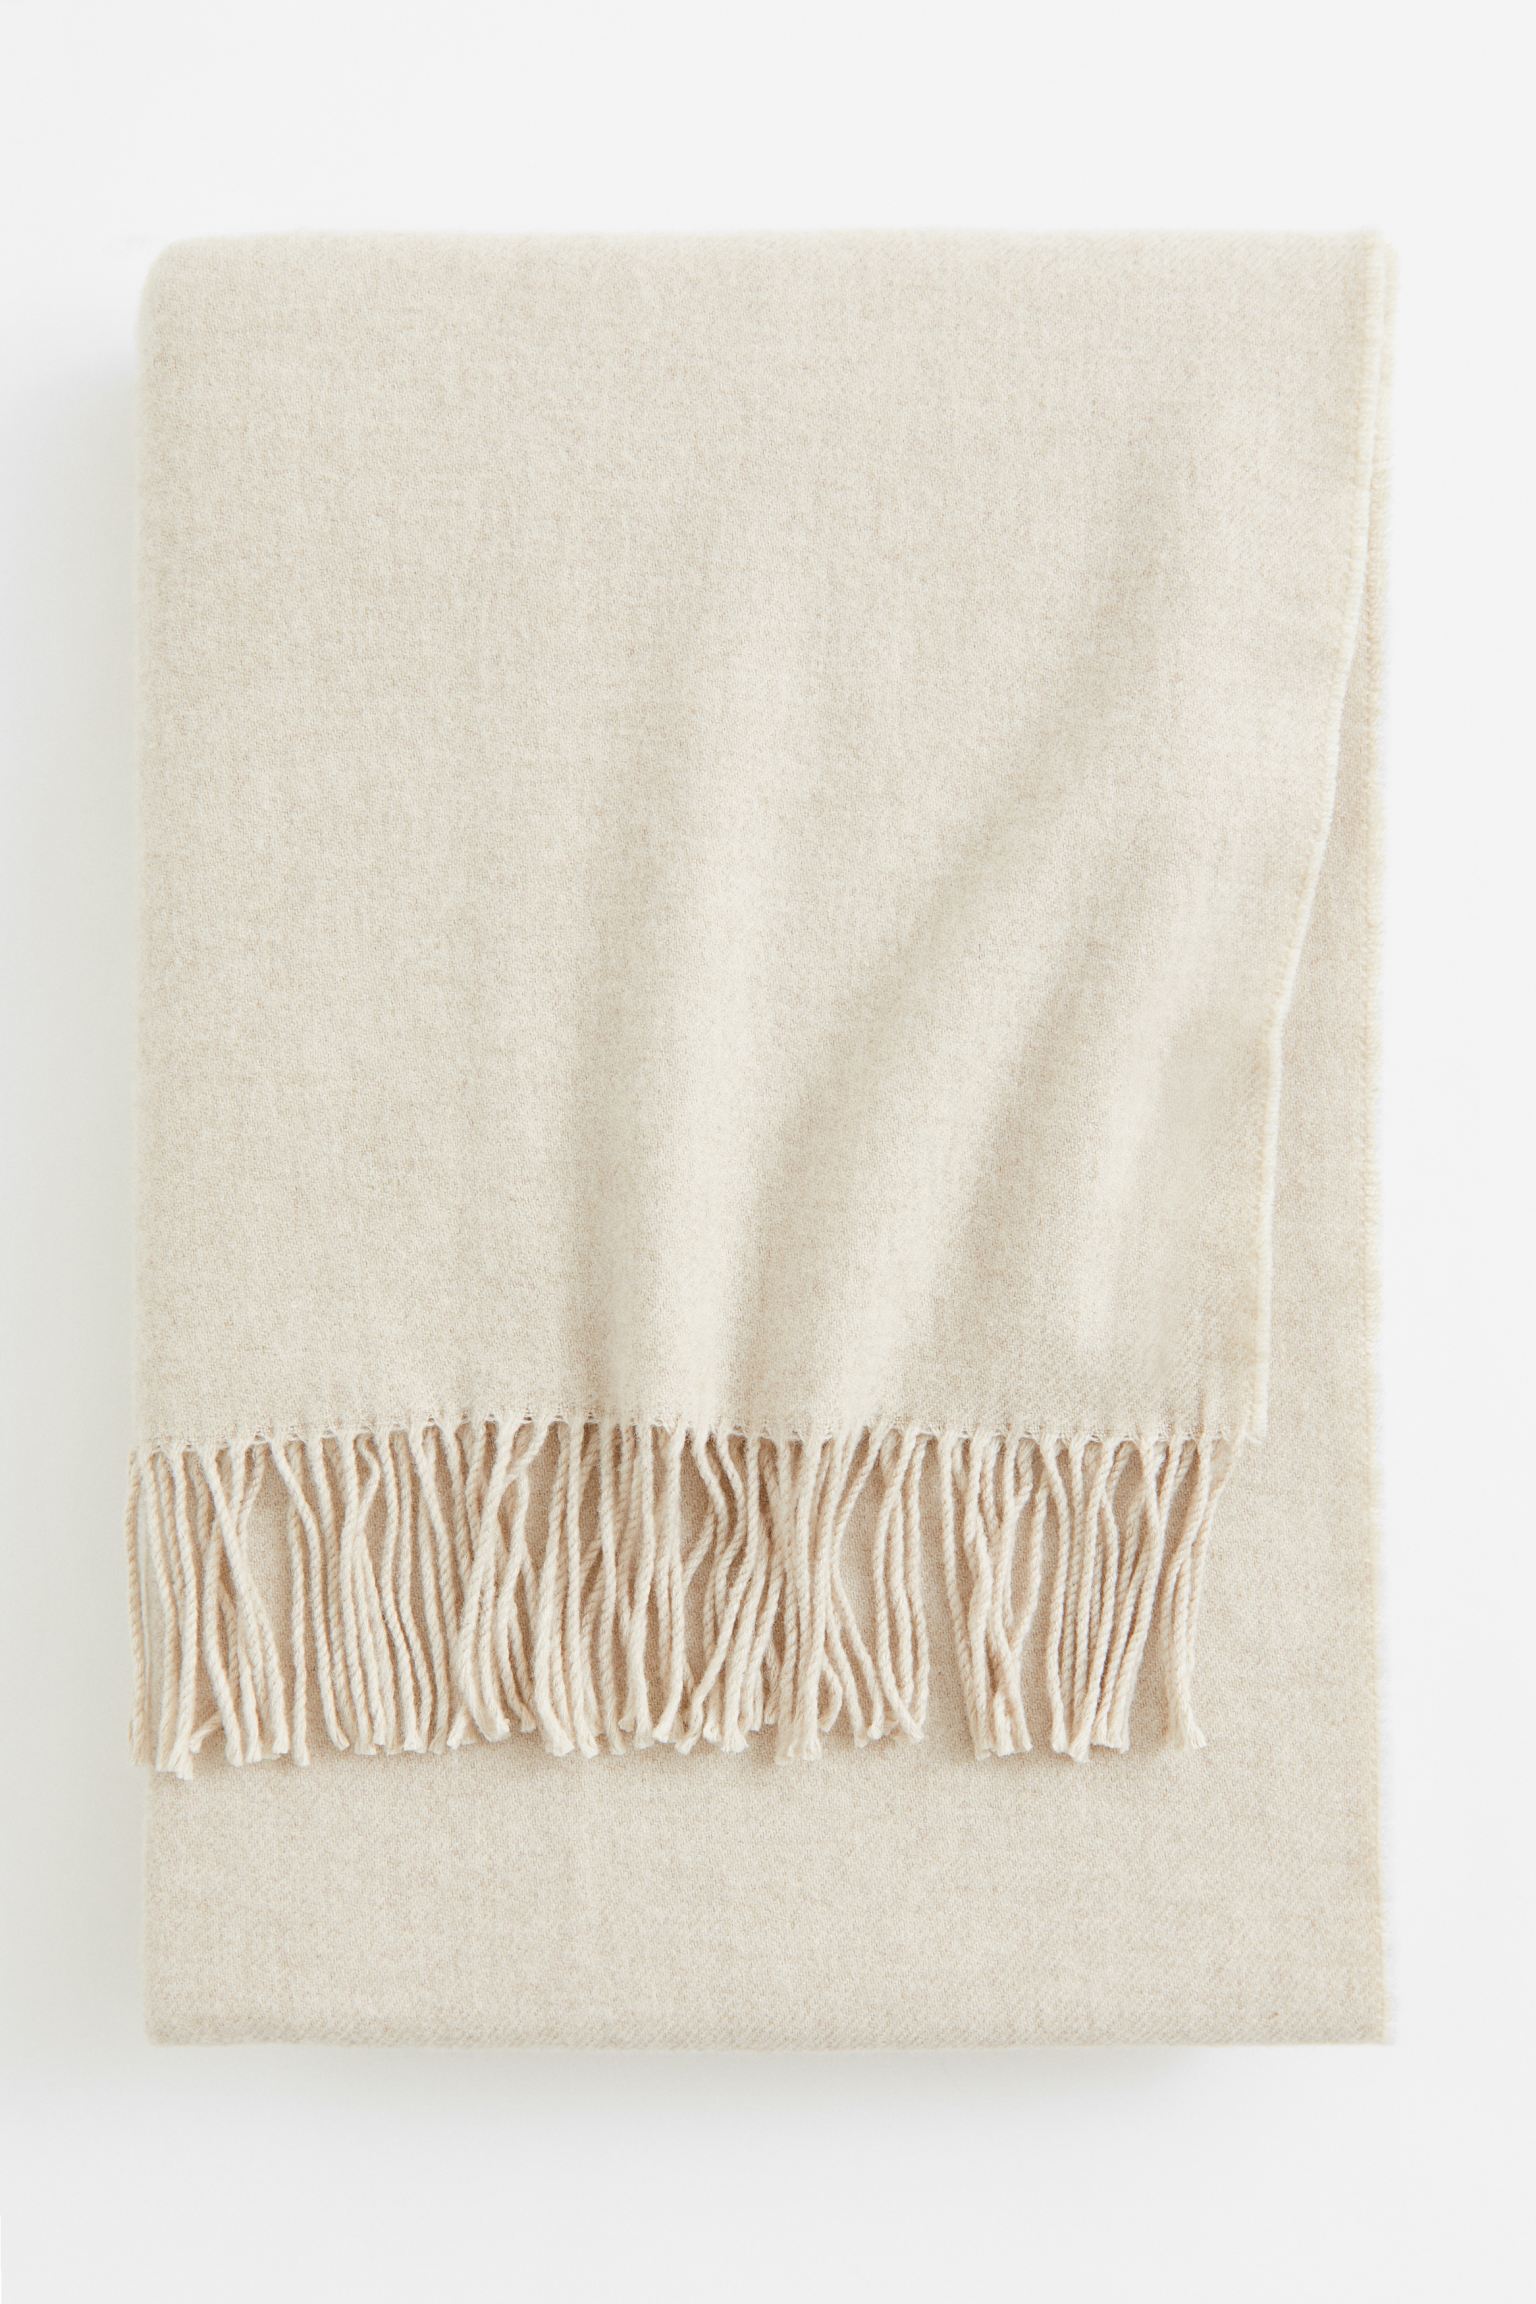 Плед H&M Home Wool-blend, светло-бежевый плед s